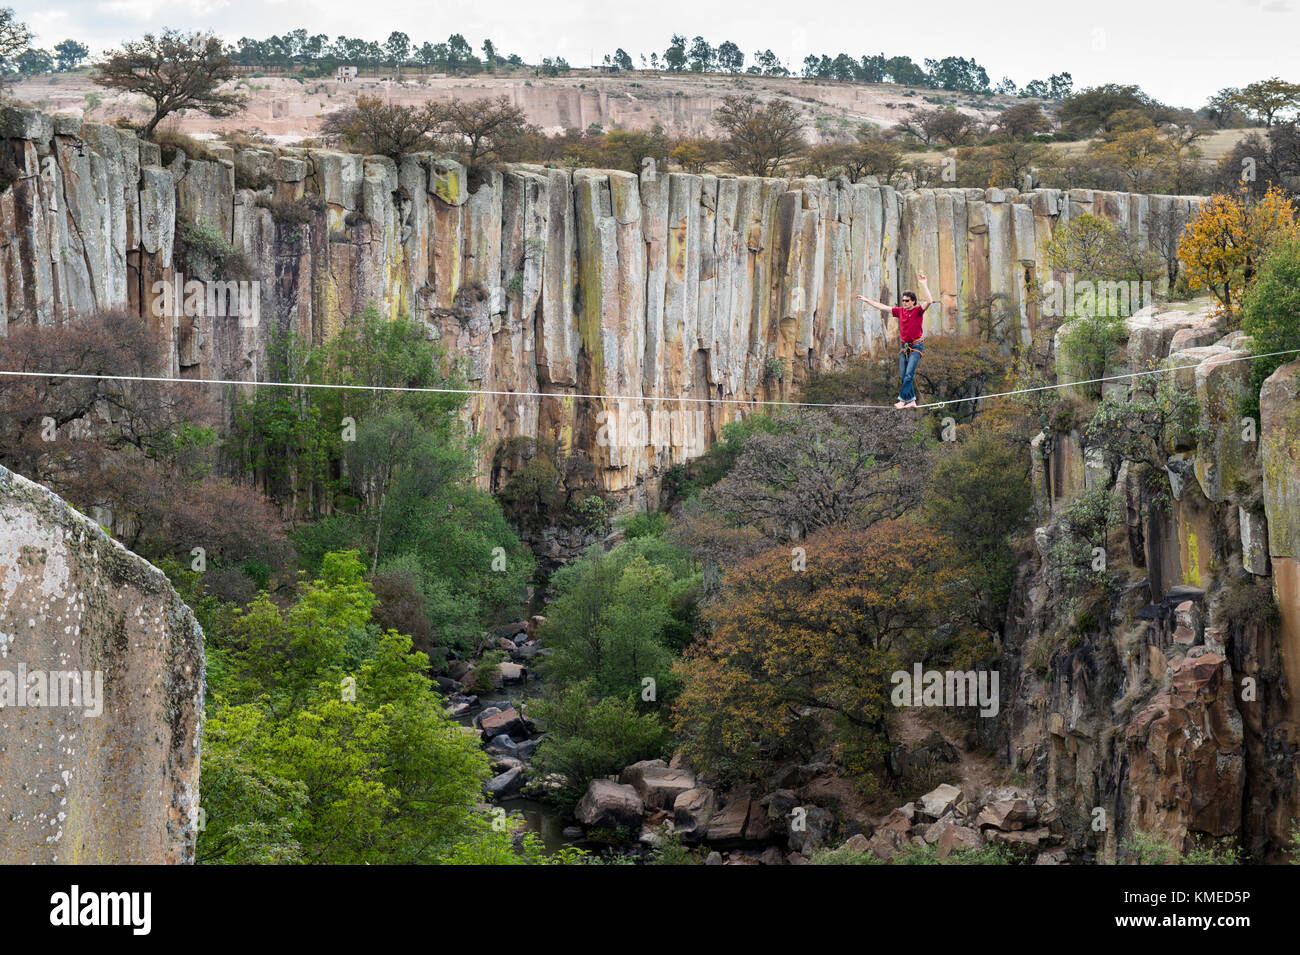 Person balancing on rope hanging across canyon cliffs,Aculco,State of Mexico,Mexico Stock Photo